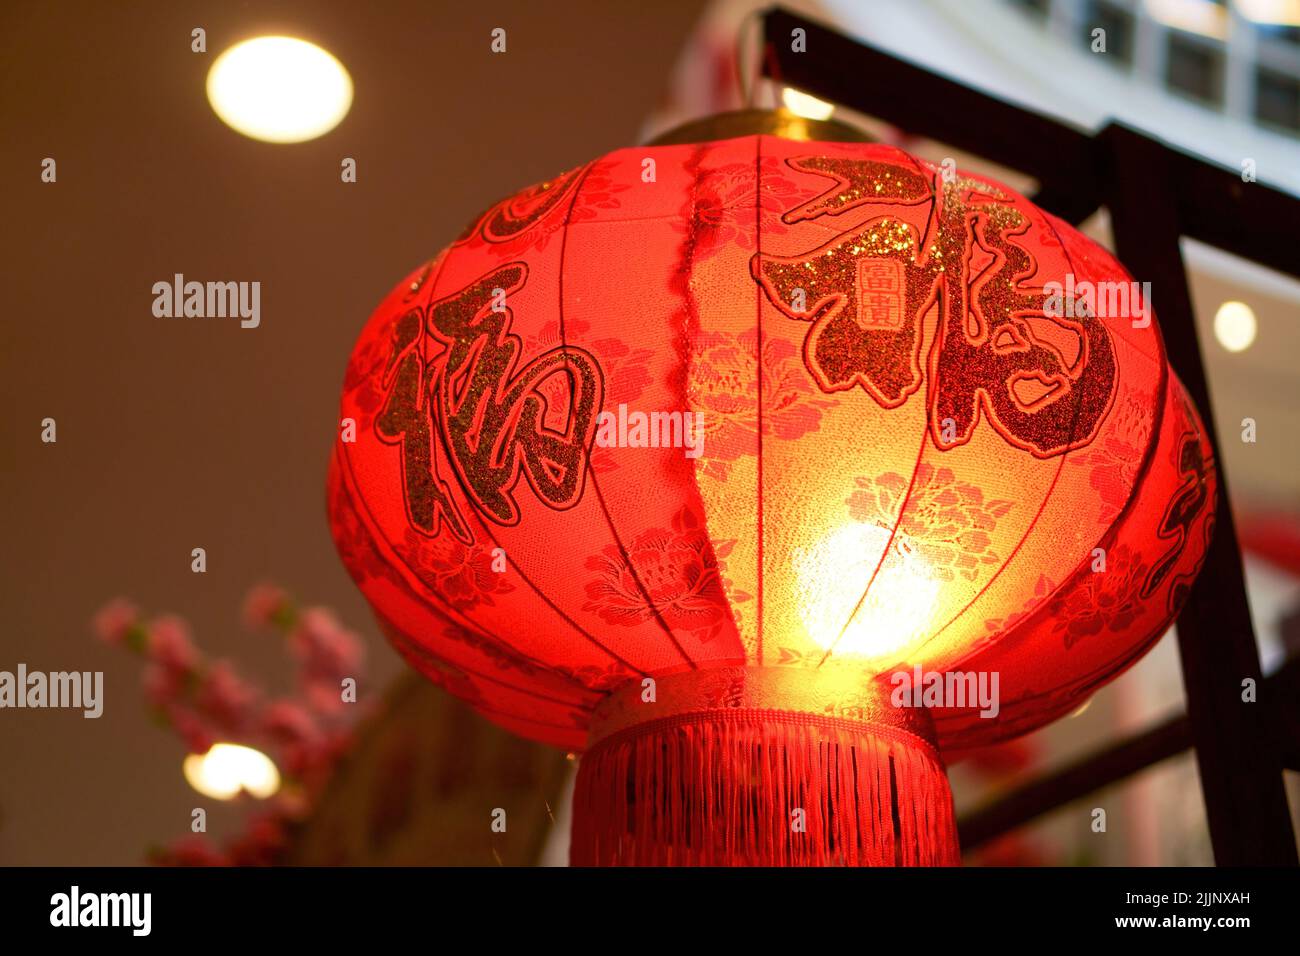 A closeup shot of a red lantern for Chinese new year decoration Stock Photo